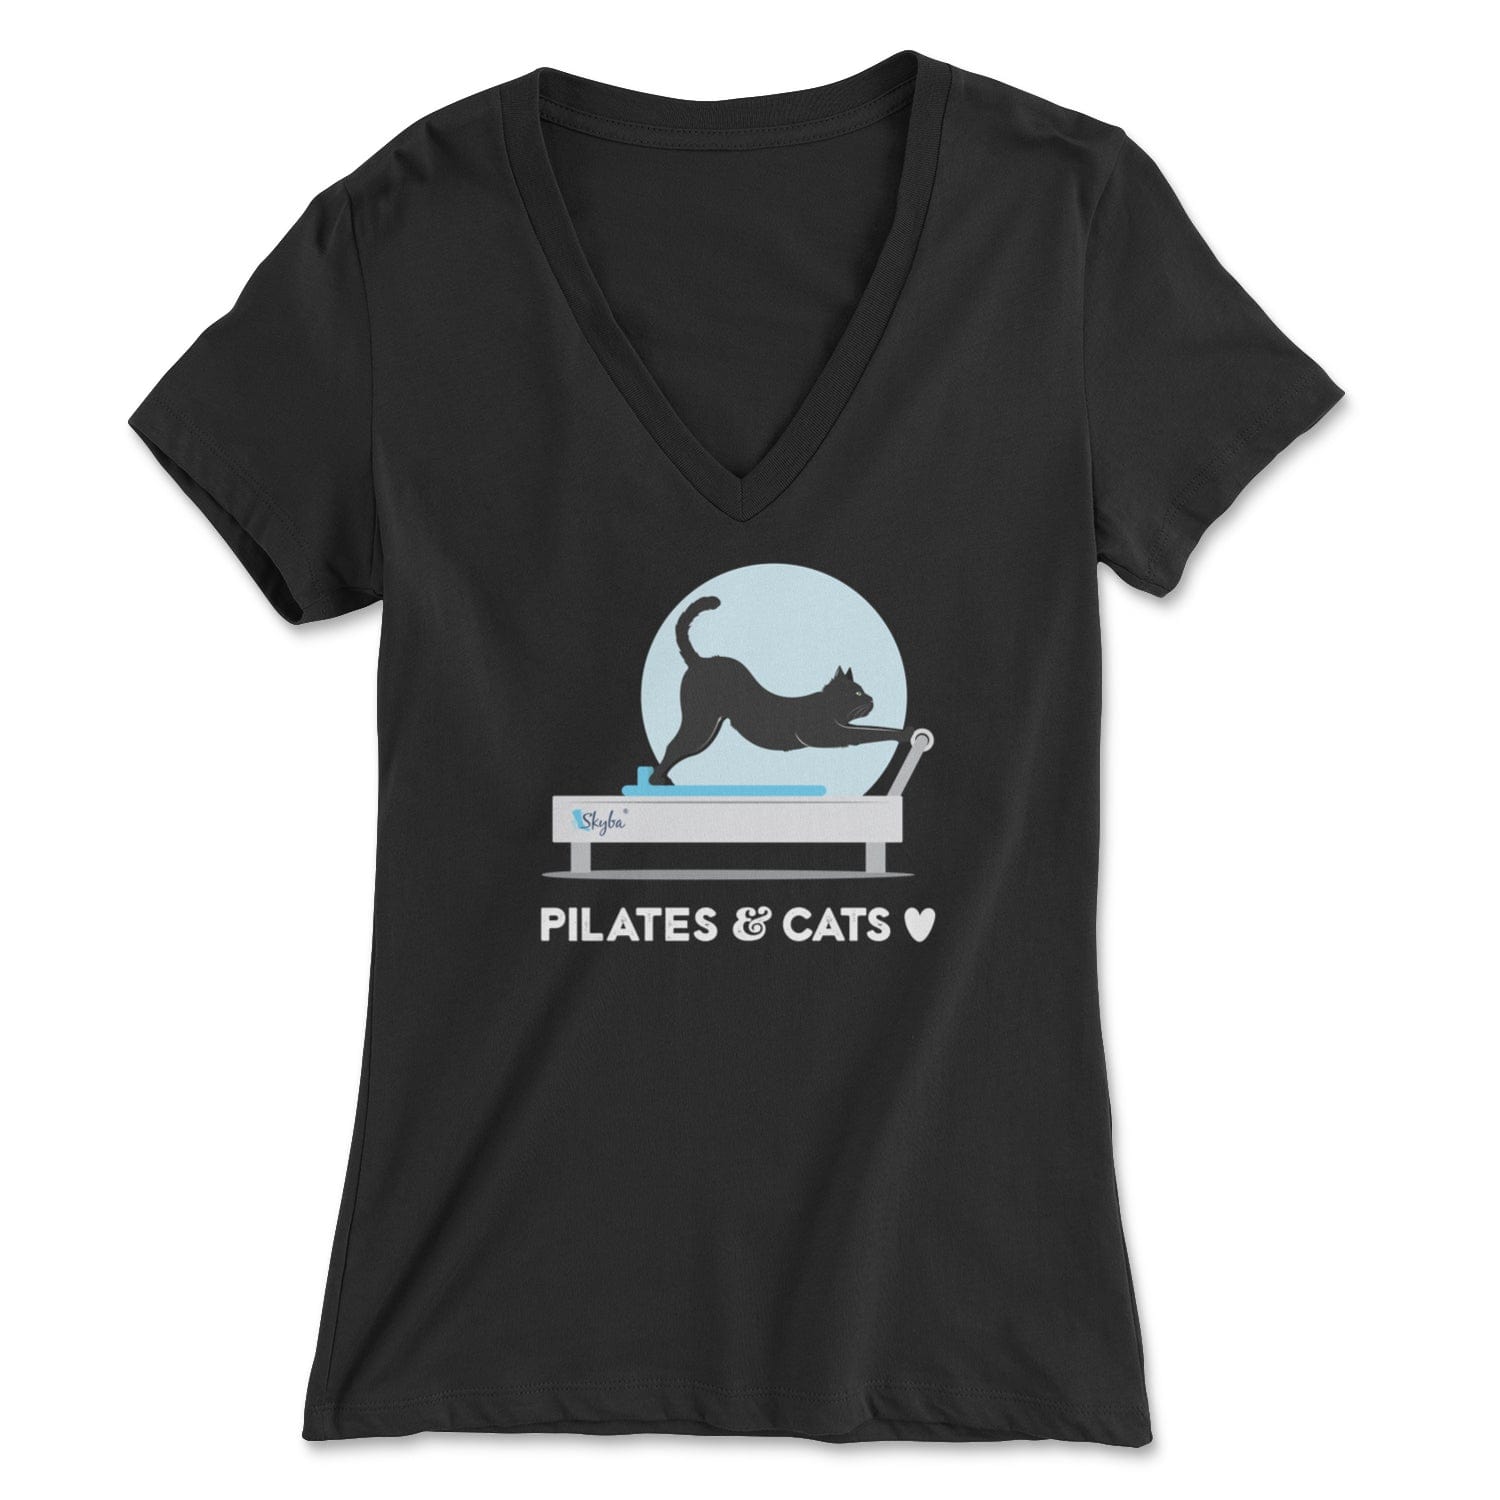 "Pilates & Cats" on the Reformer - Women's V-Neck Tee Skyba Print Material